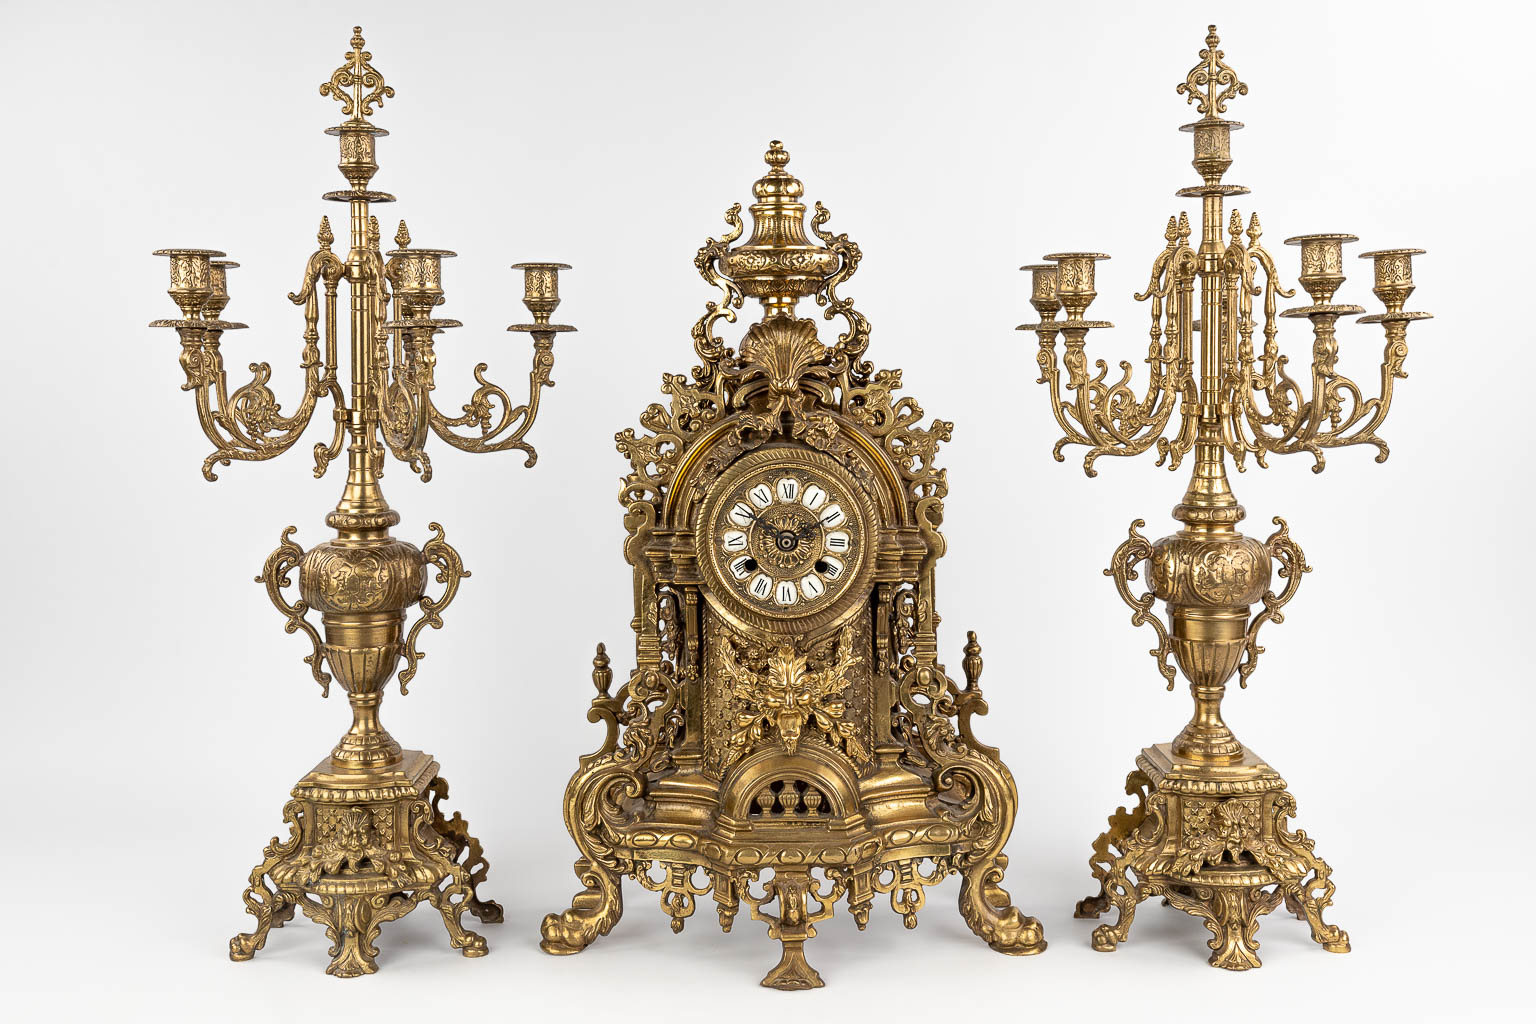 A three-piece mantle garniture consisting of a clock with candelabra, made of bronze. circa 1970. (W: 36 x H: 60 cm)